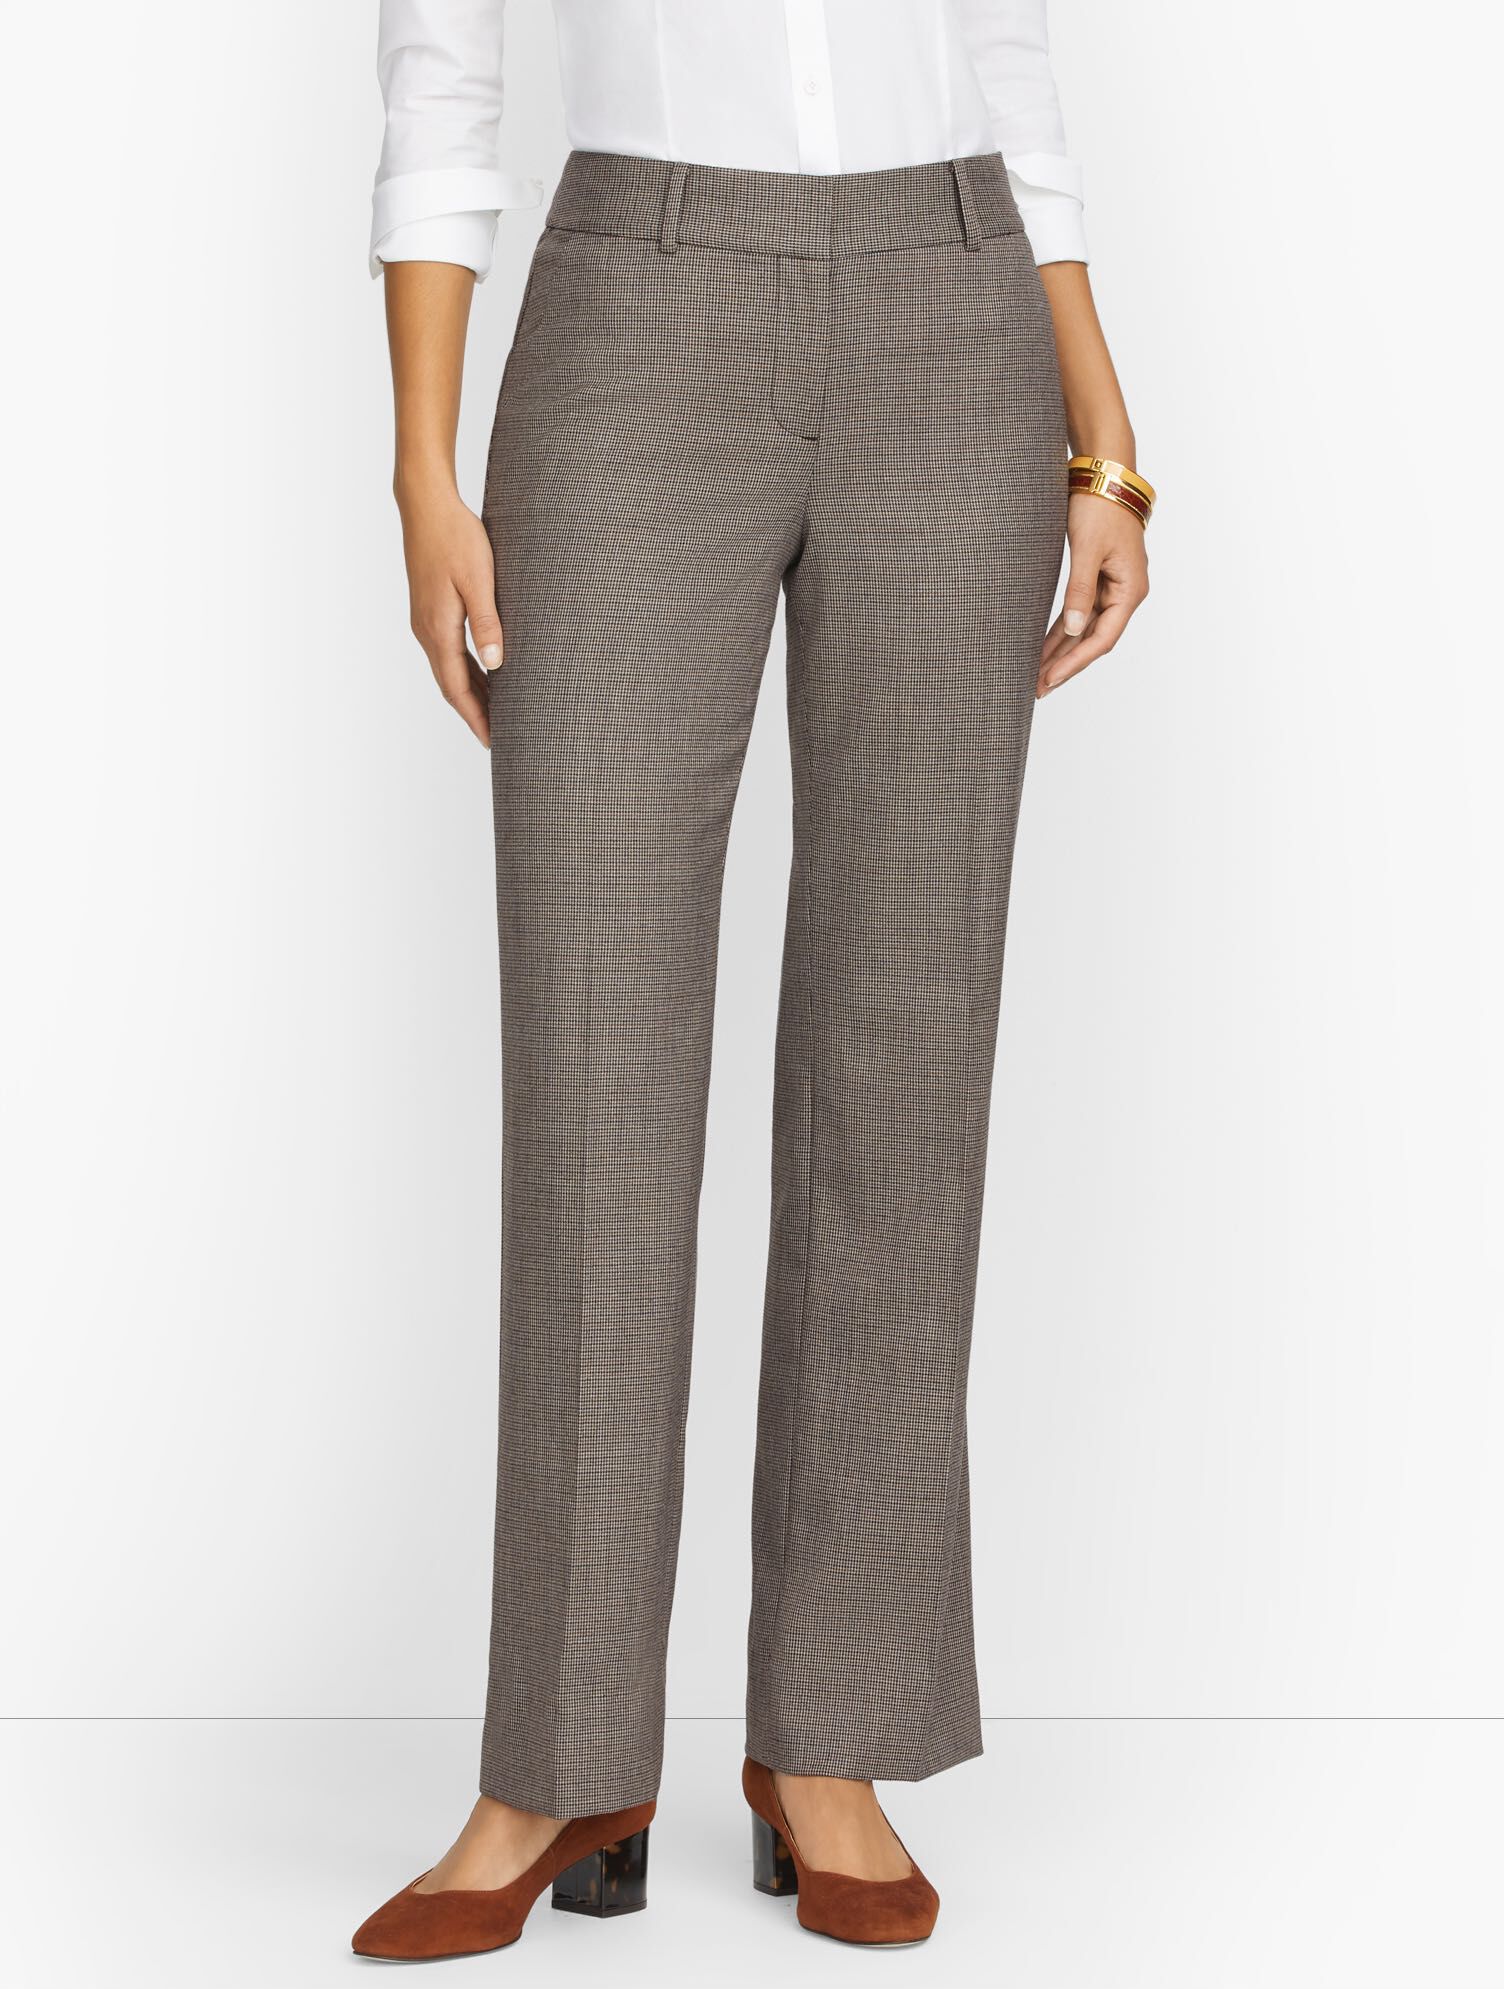 Talbots Newport Pants - Houndstooth - Curvy Fit